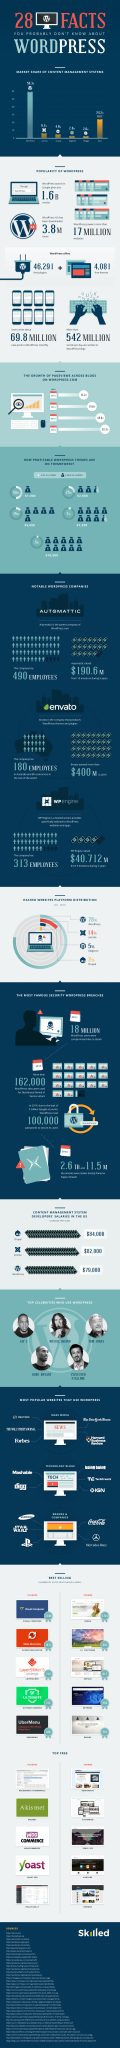 28 Facts About Wordpress Infographic